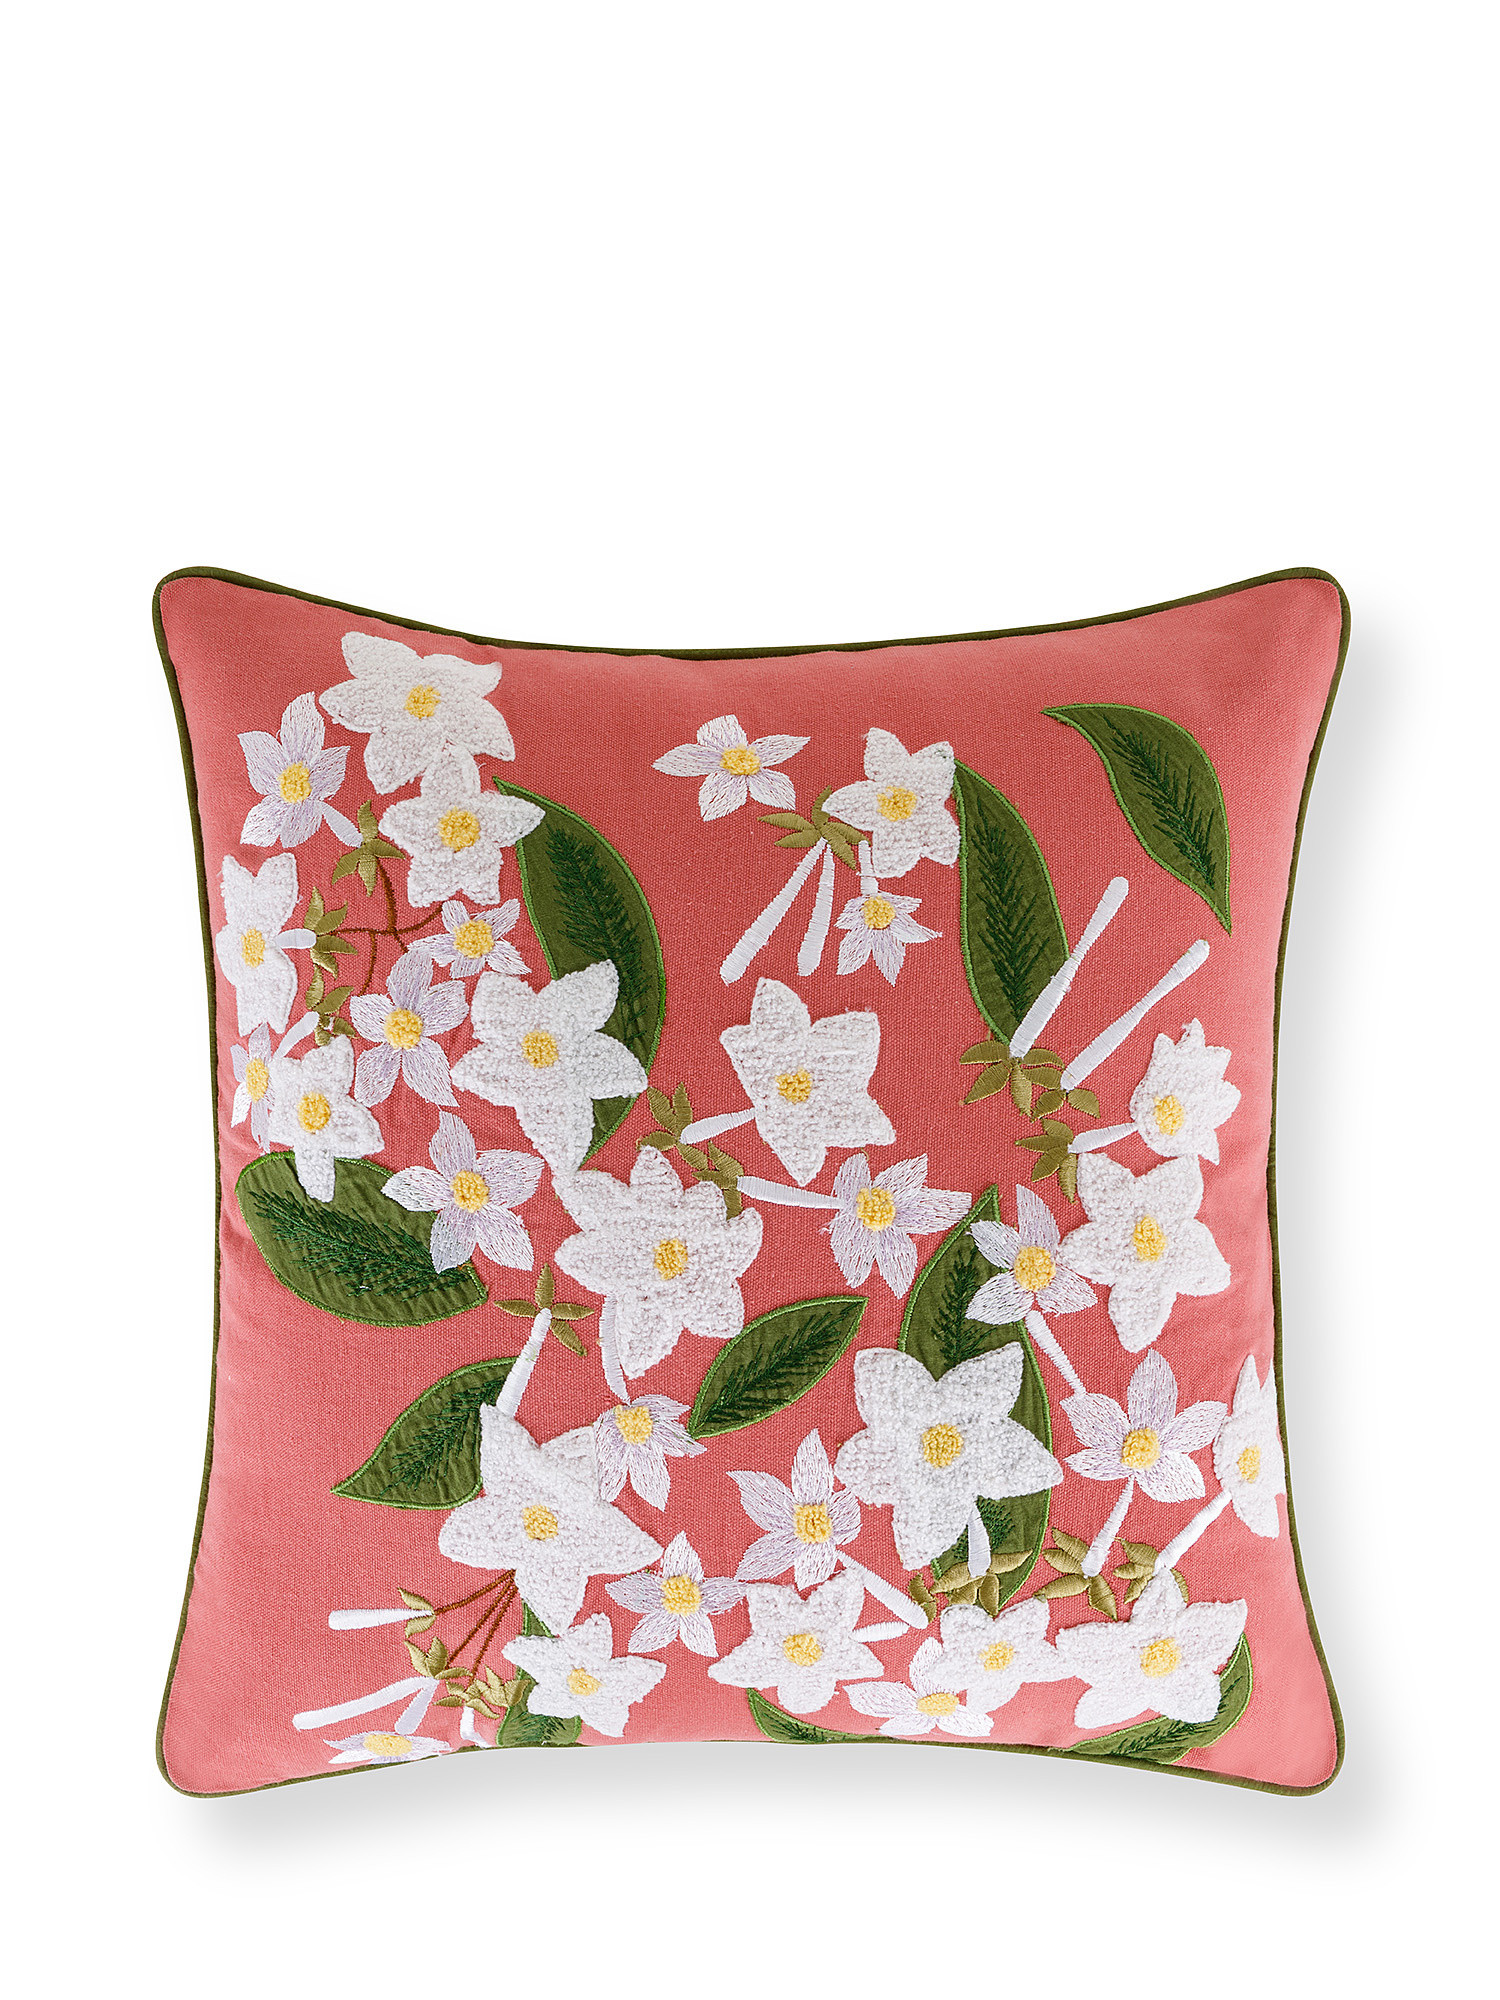 Flower embroidery cushion 45x45cm, Pink, large image number 0